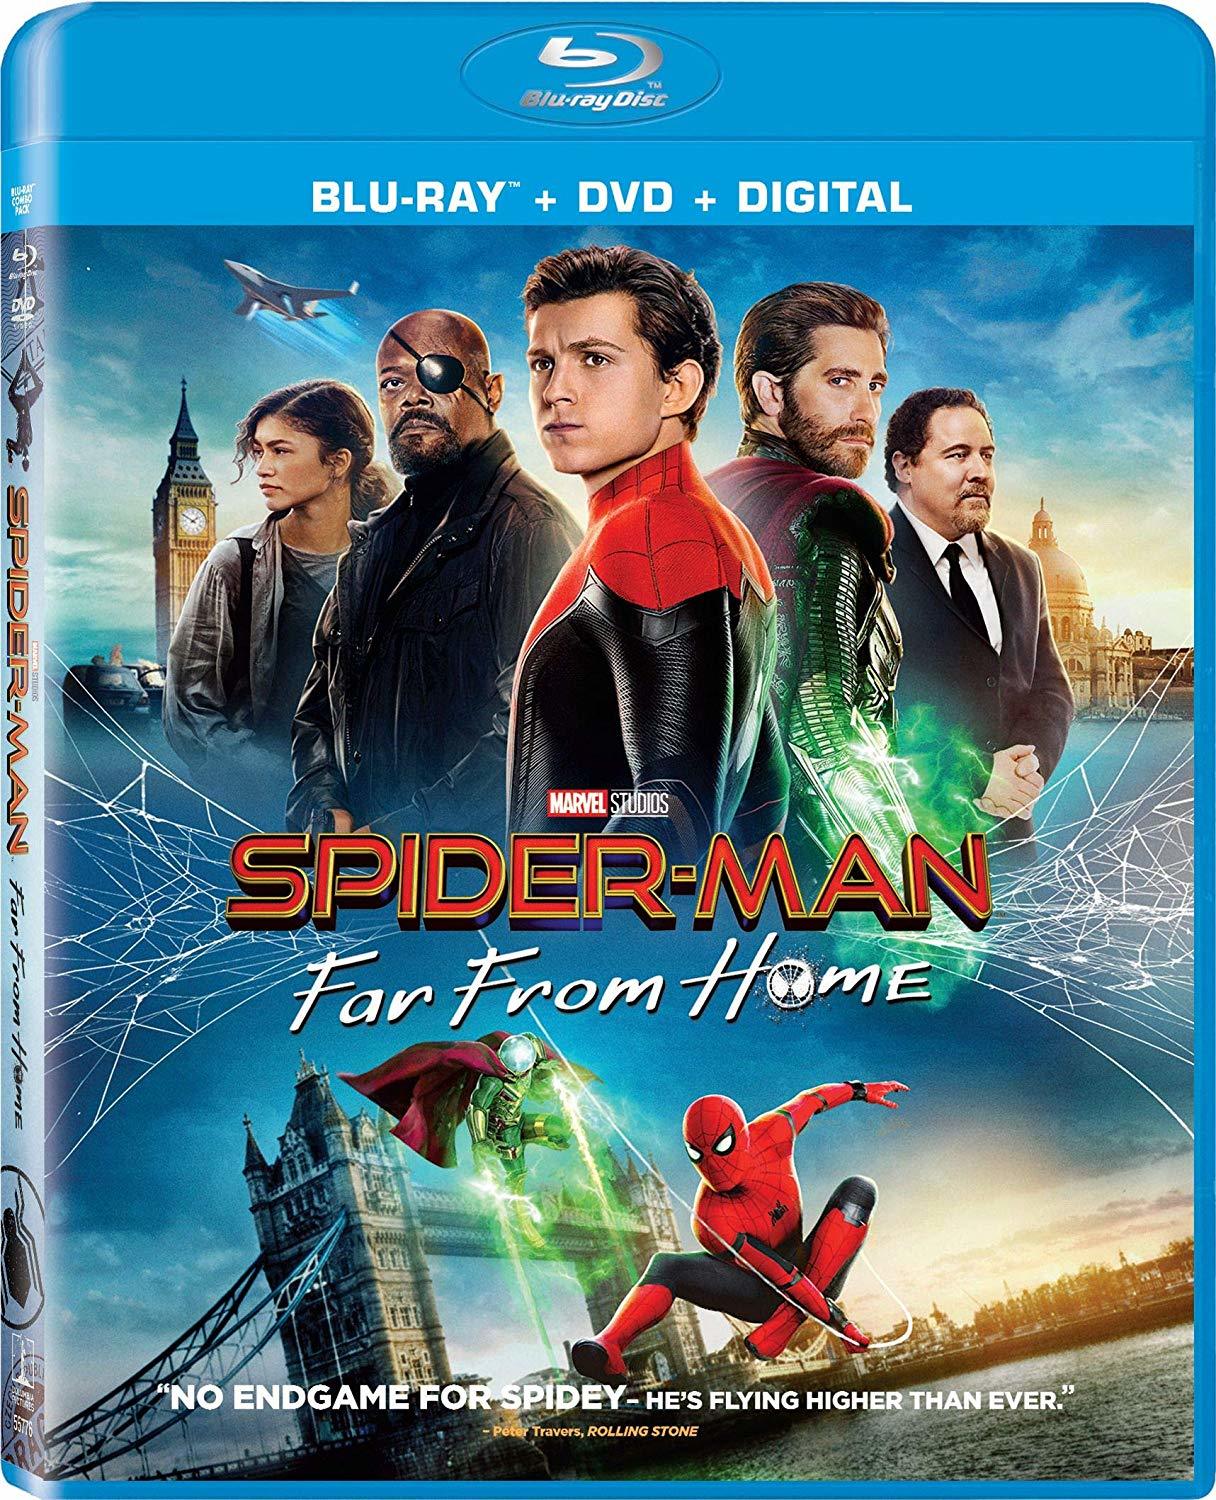 Spider-Man: Far from Home (2019) Spider-Man: Lejos de Casa (2019) [AC3 5.1 + SUP] [Blu Ray-Rip] 246790_front